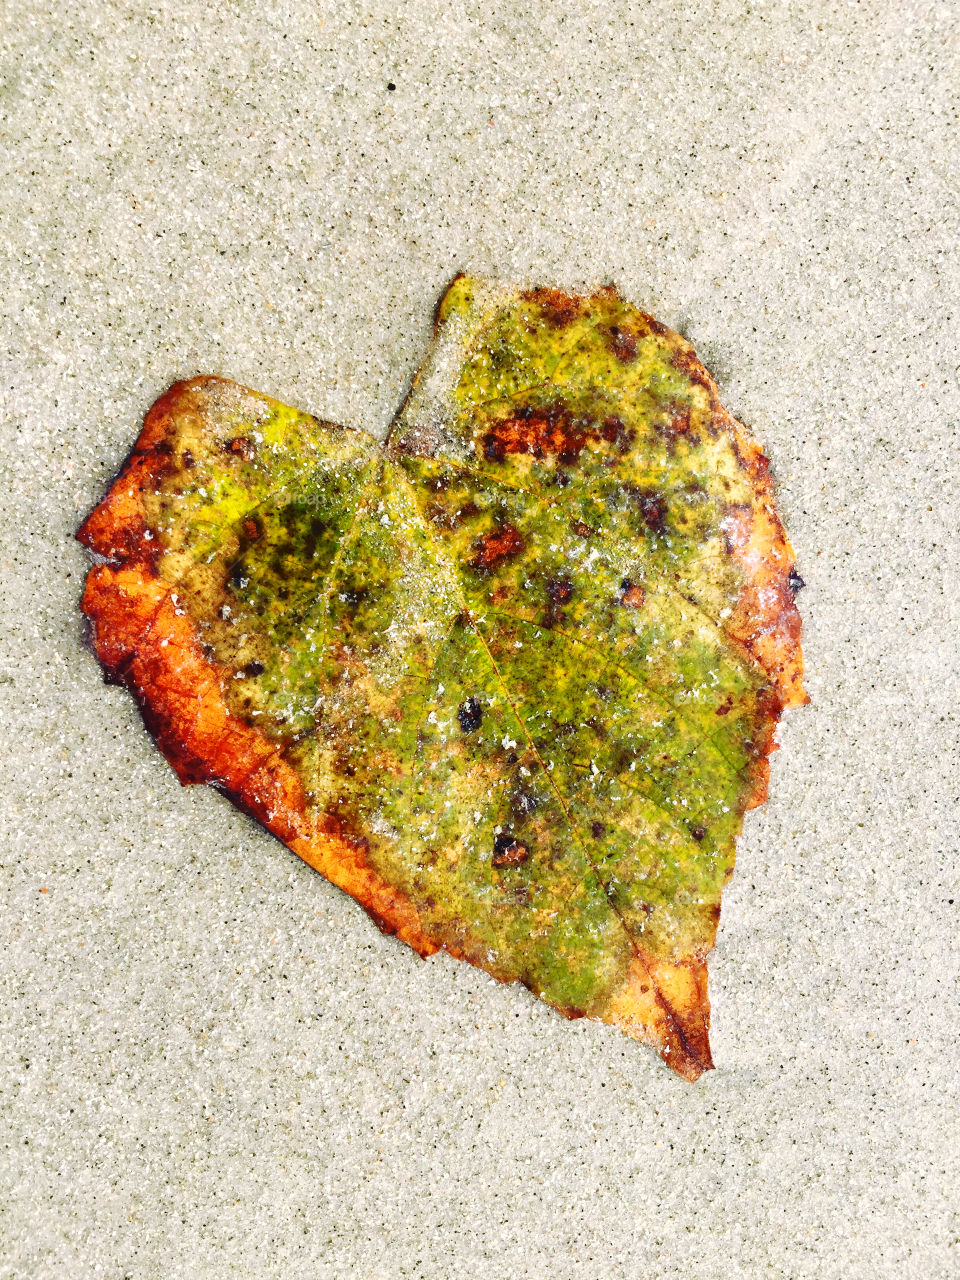 Heart-shaped leaf laying in the sand.